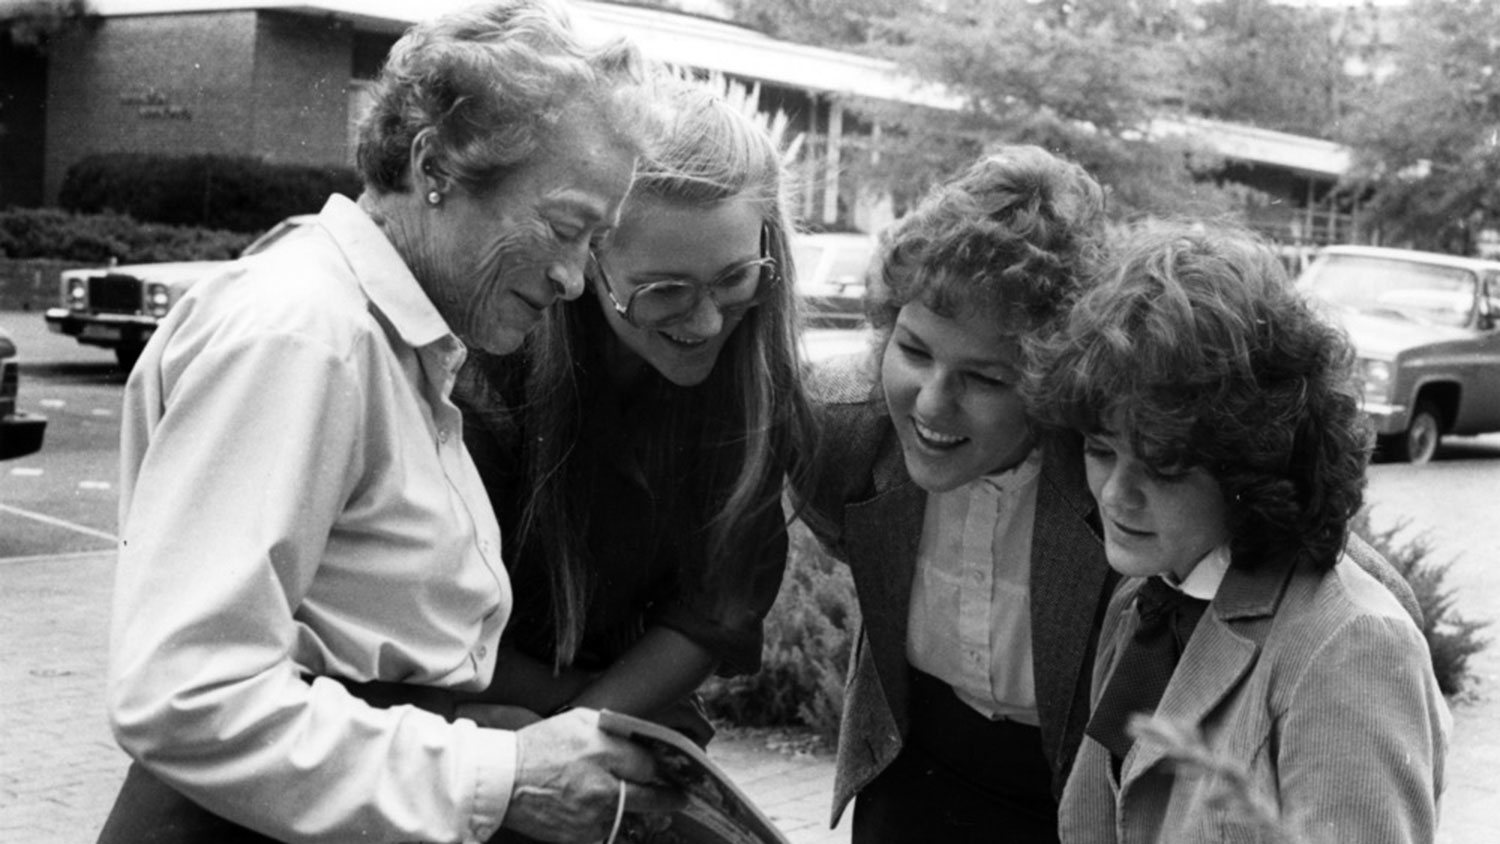 Katherine Stinson, the first female graduate of the College of Engineering, with students on campus (circa 1970s).